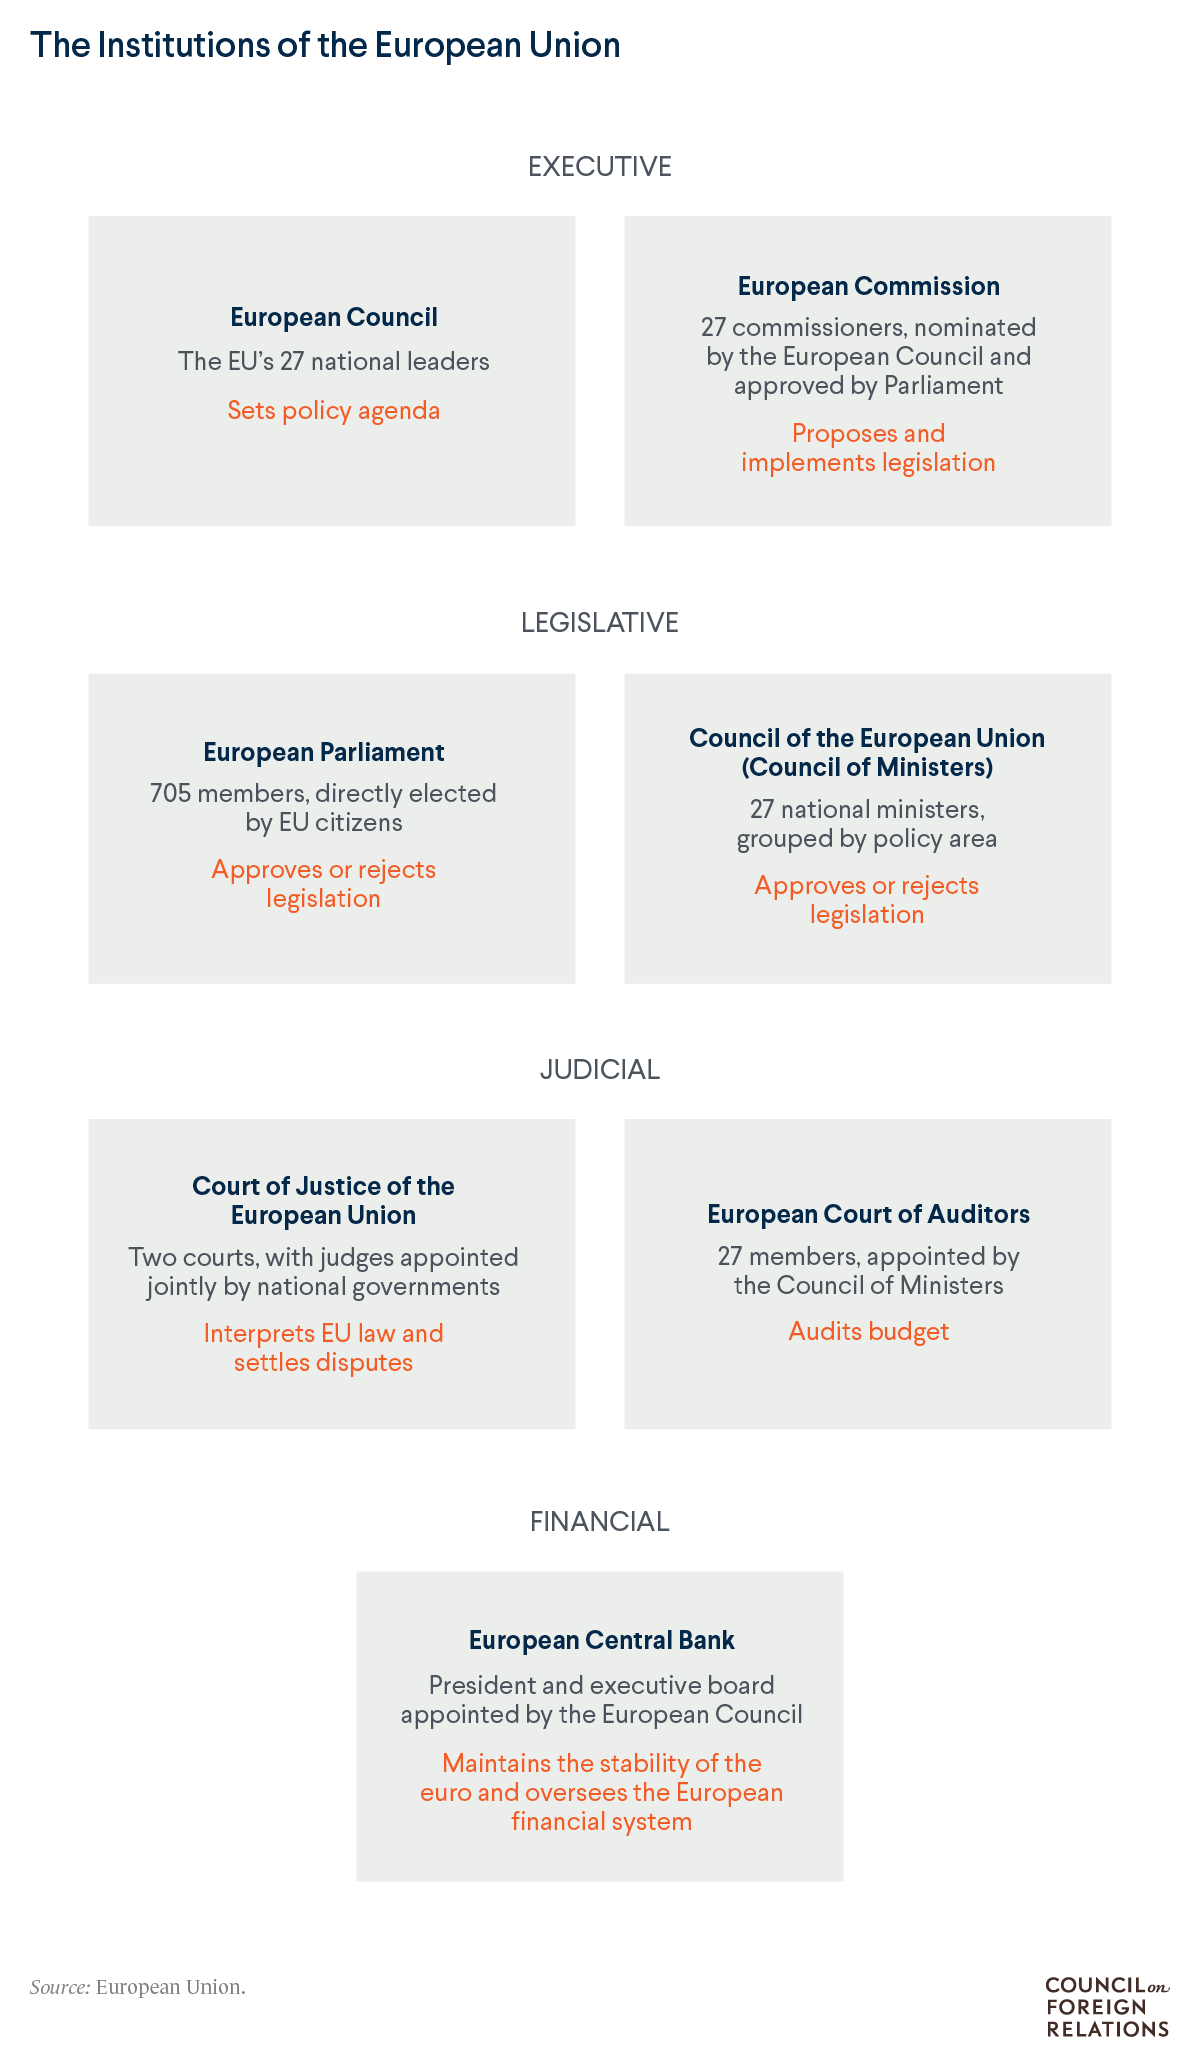 How Does the European Union Work?